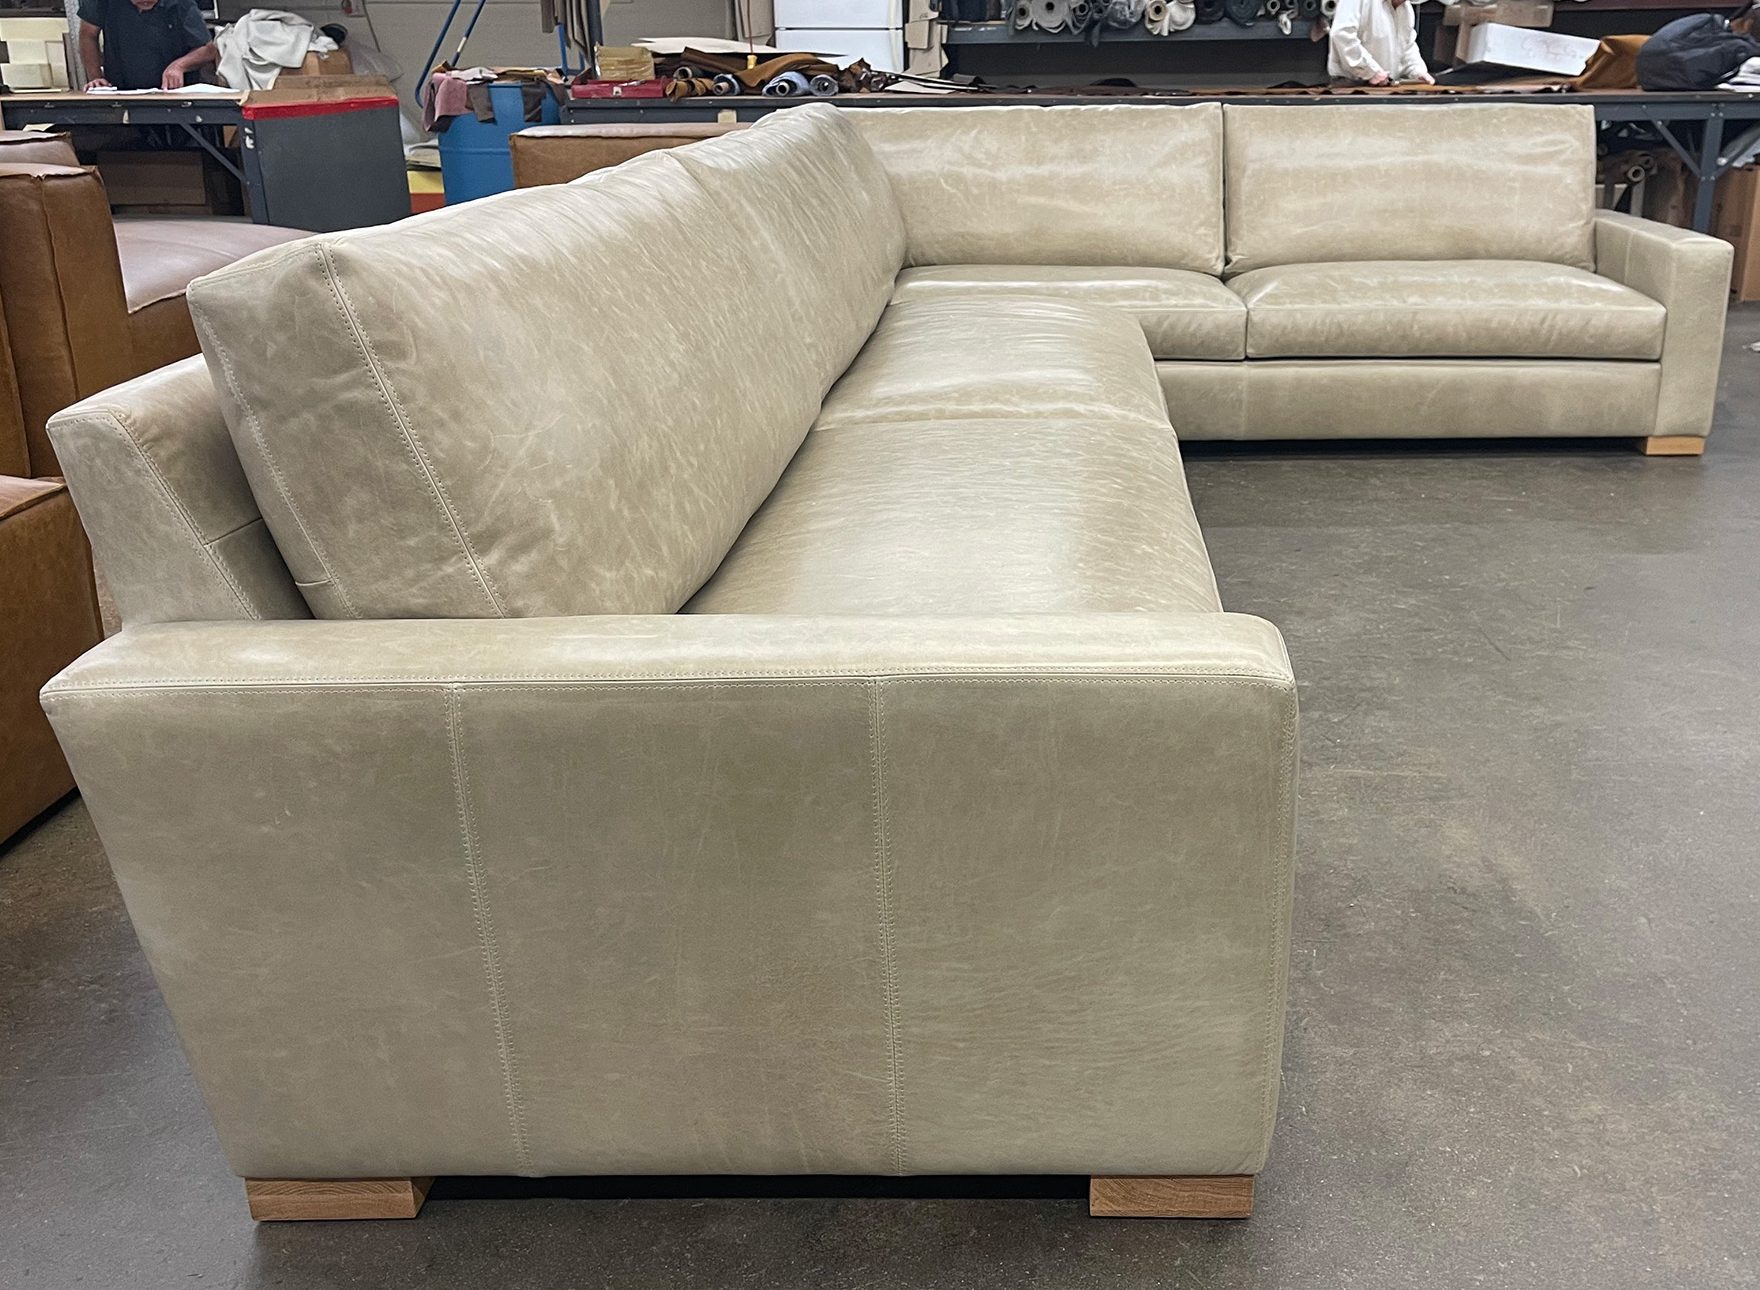 Braxton LAF L Sectional in Mont Blanc Smoke leather with Custom White Oak legs - LAF side view